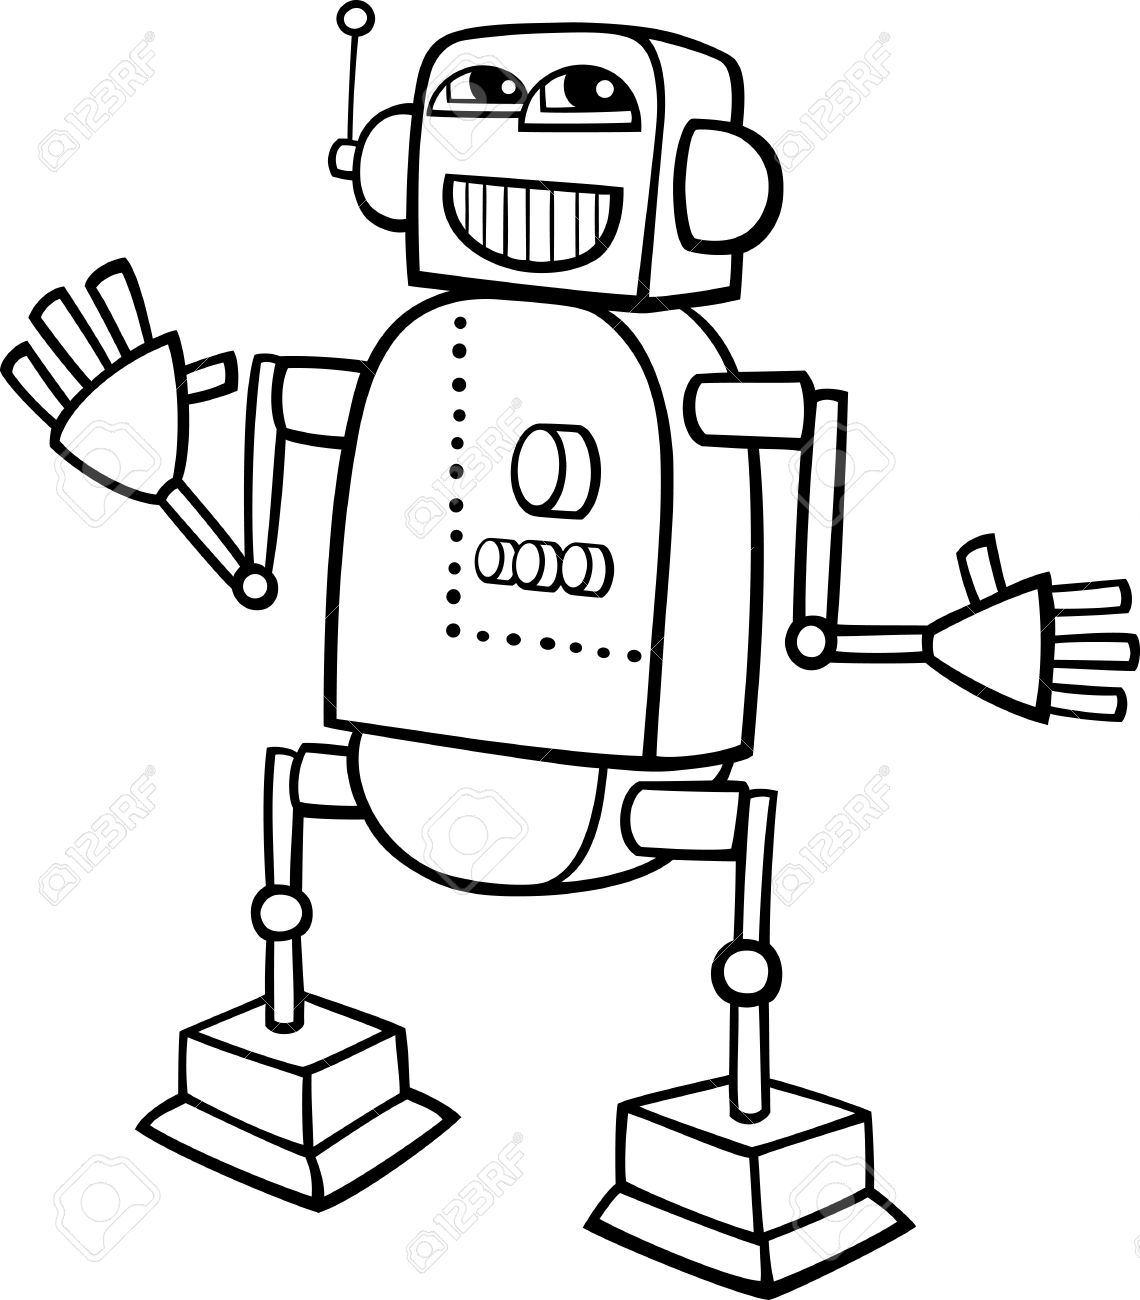 Robot clipart black and white 1 » Clipart Station.